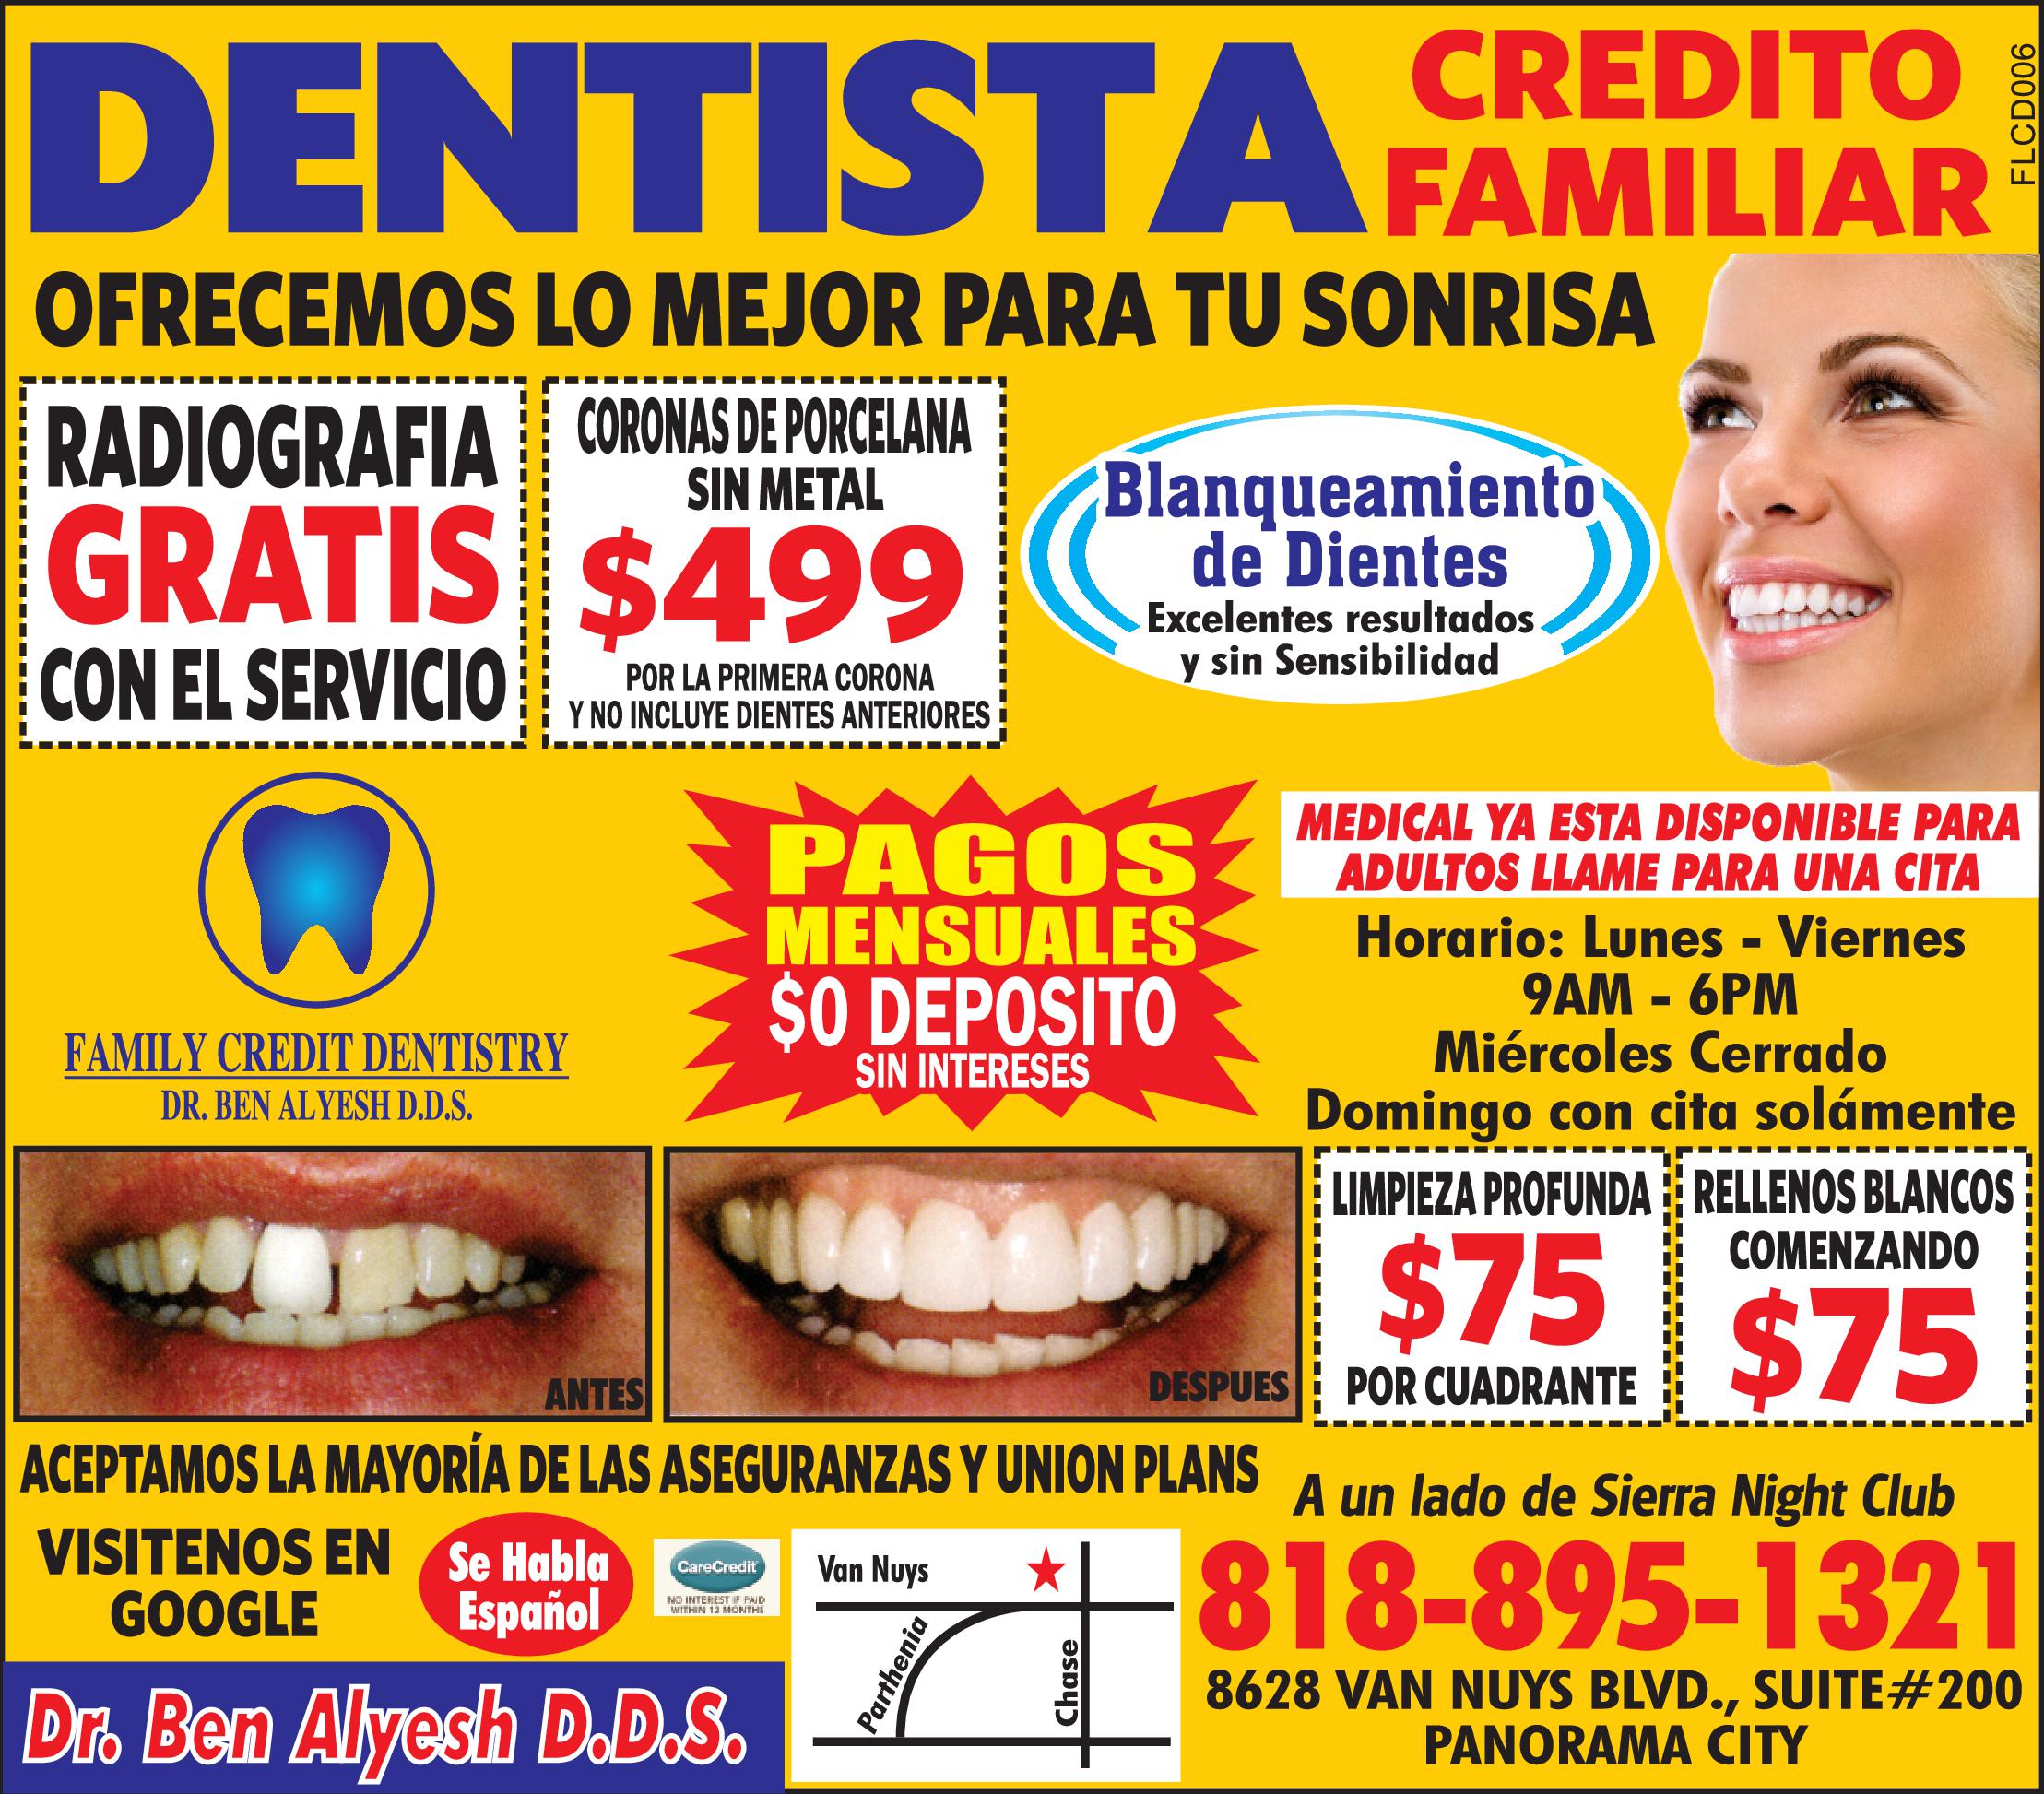  FAMILY CREDIT DENTISTRY 